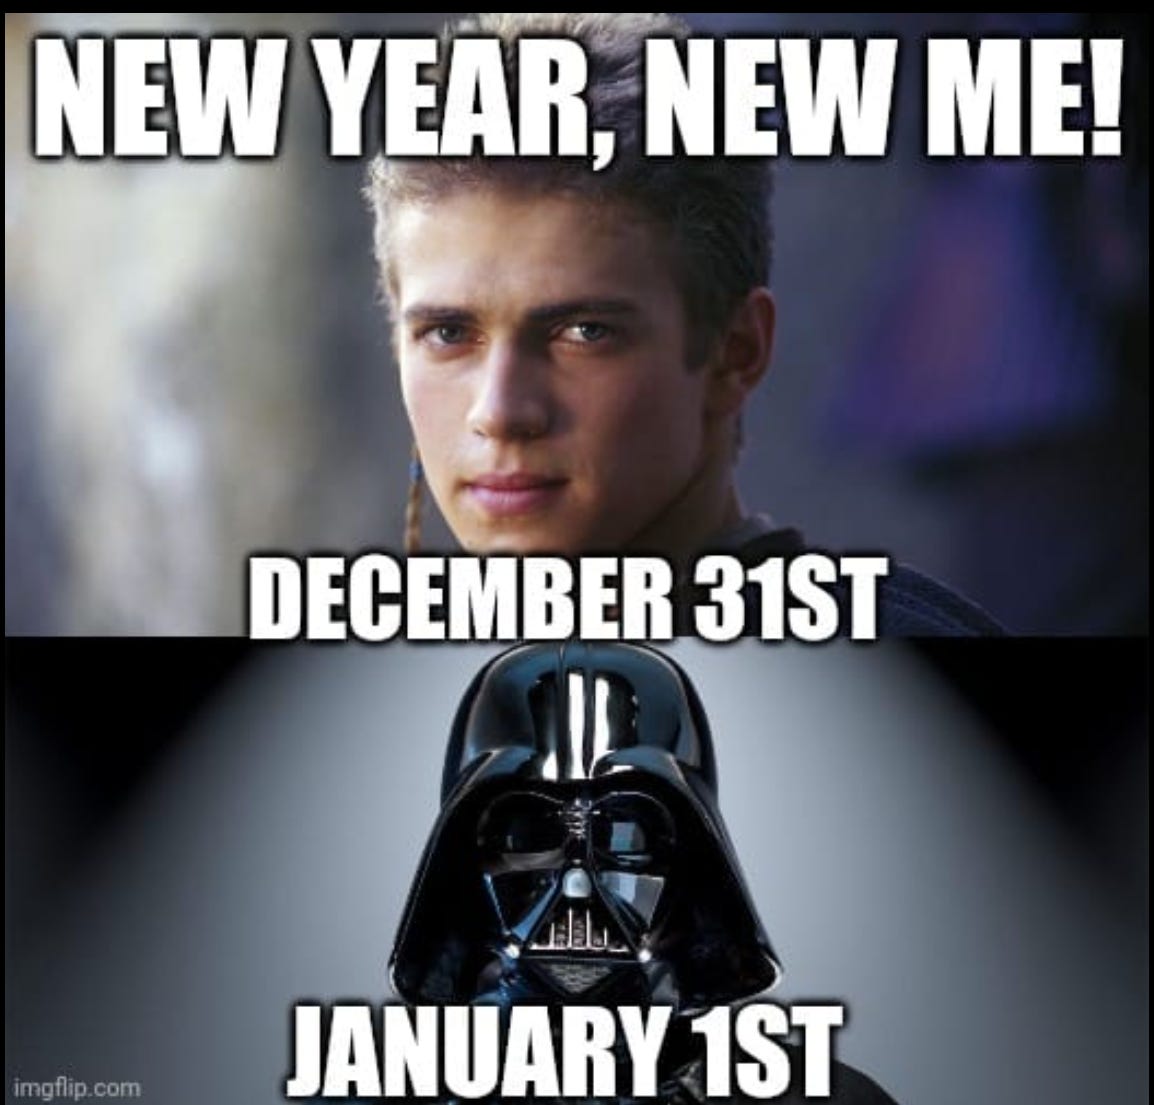 New Year, New Sith ! | /r/PrequelMemes | New Year, New Me | Know Your Meme